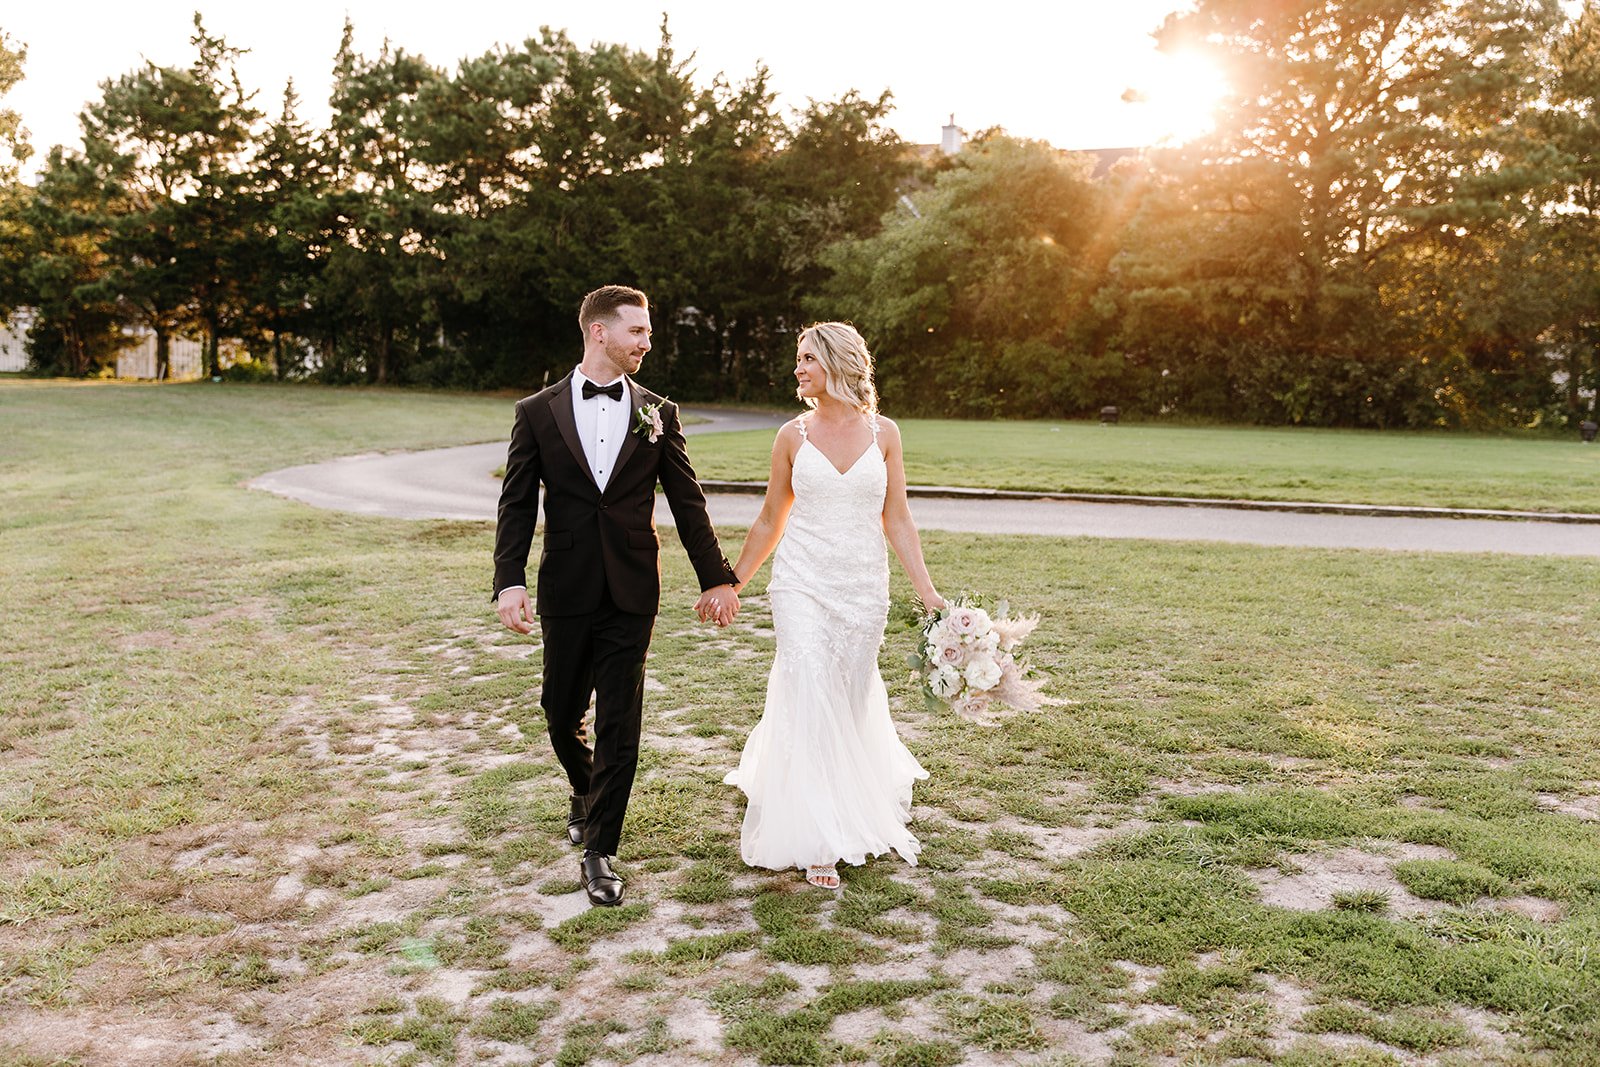 A Sophisticated New Jersey Wedding At Blue Heron Pines Golf Course